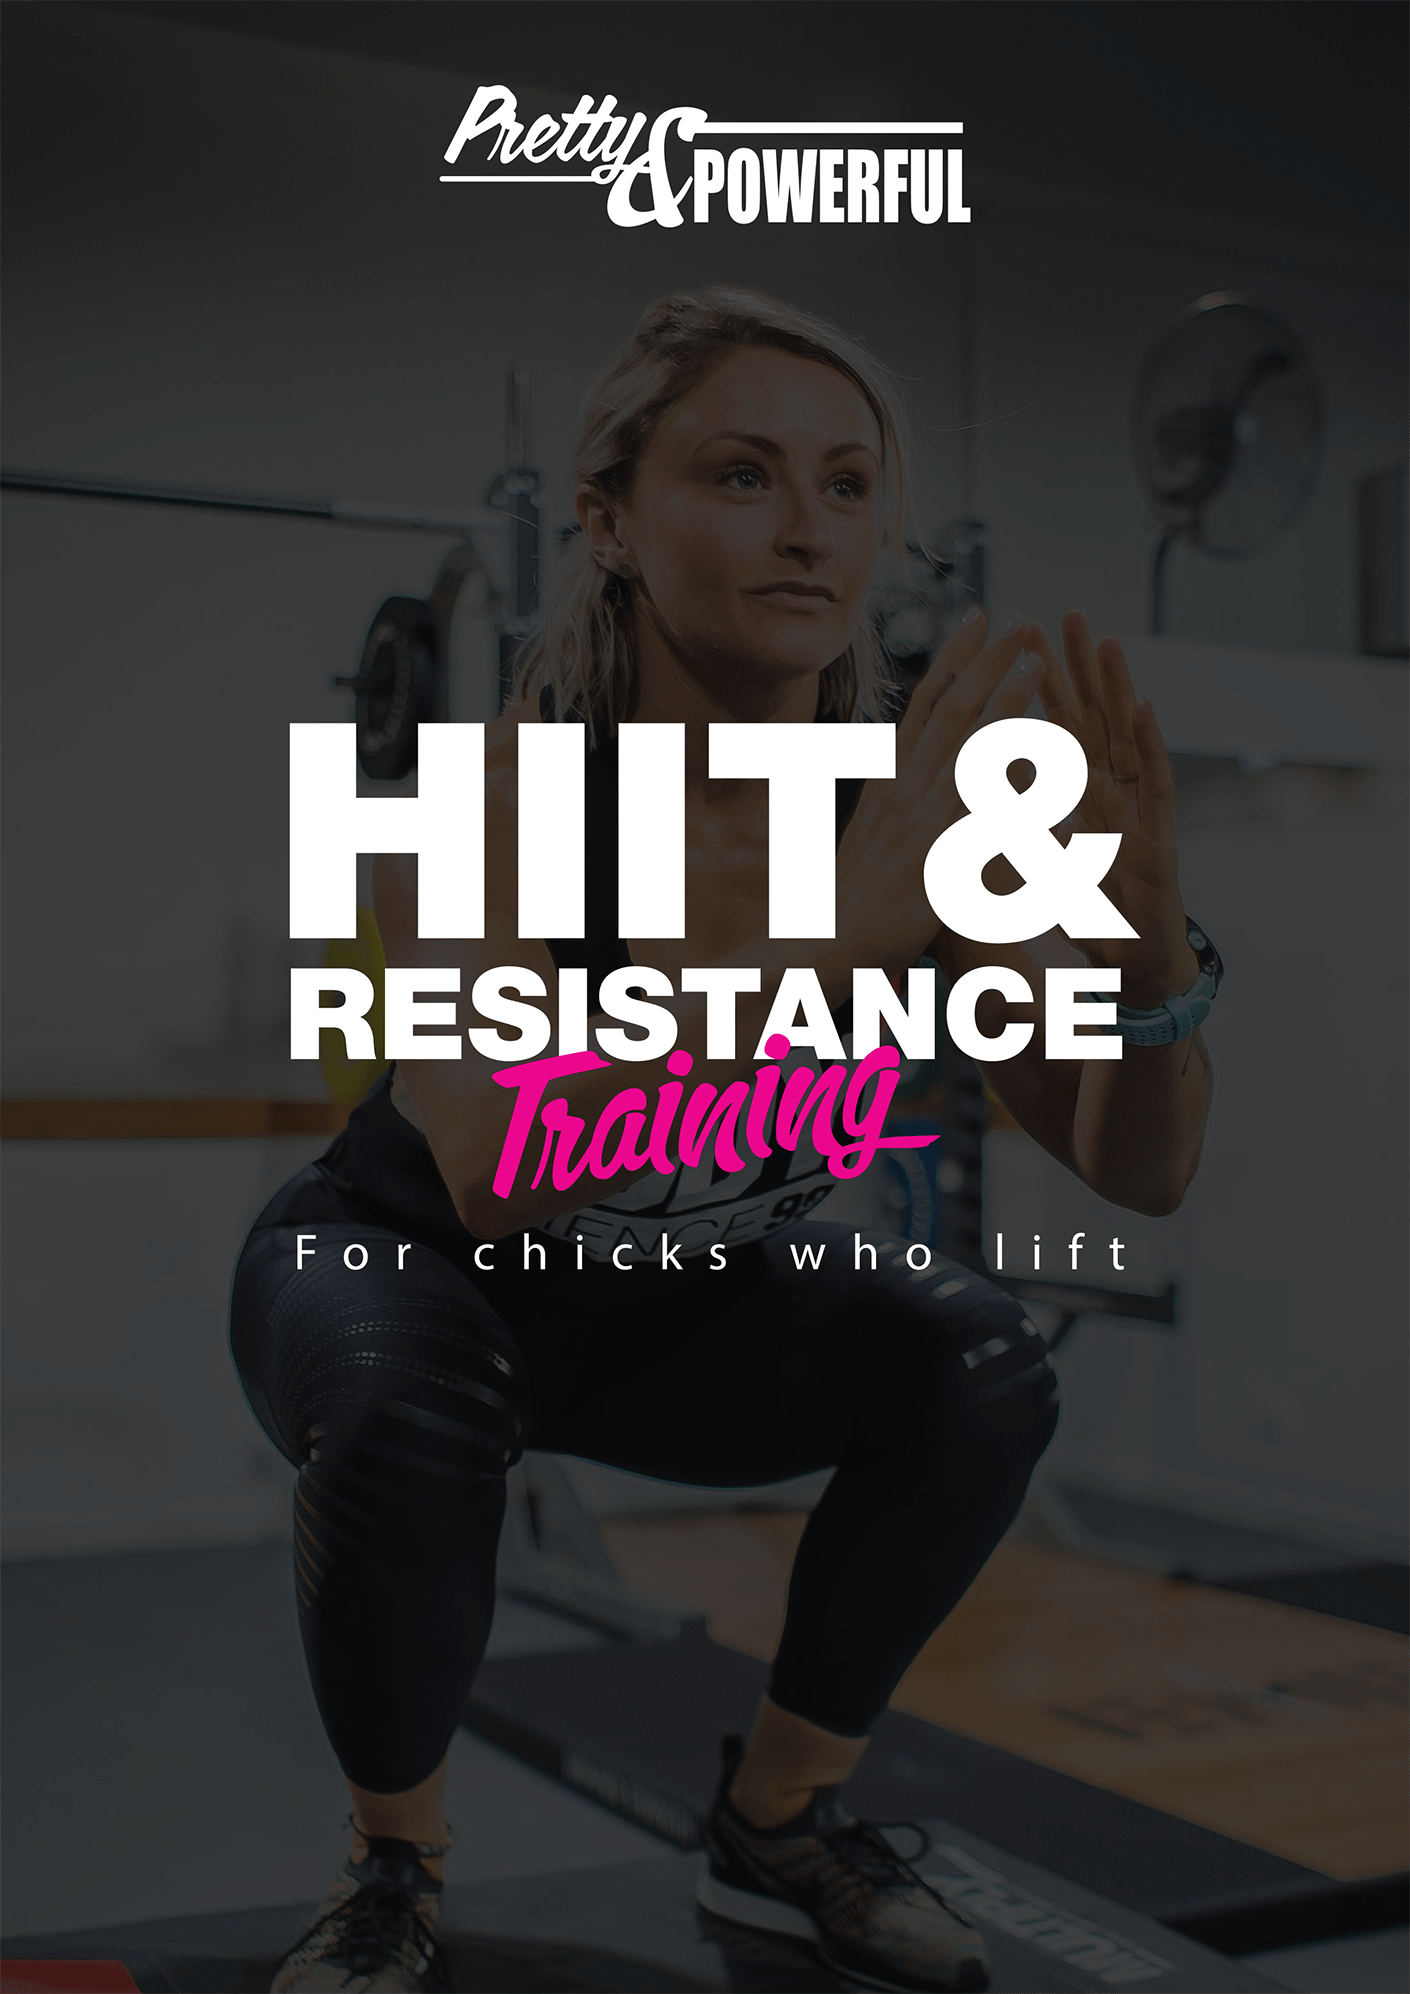 HIIT & Resistance Training for Chicks Who Lift